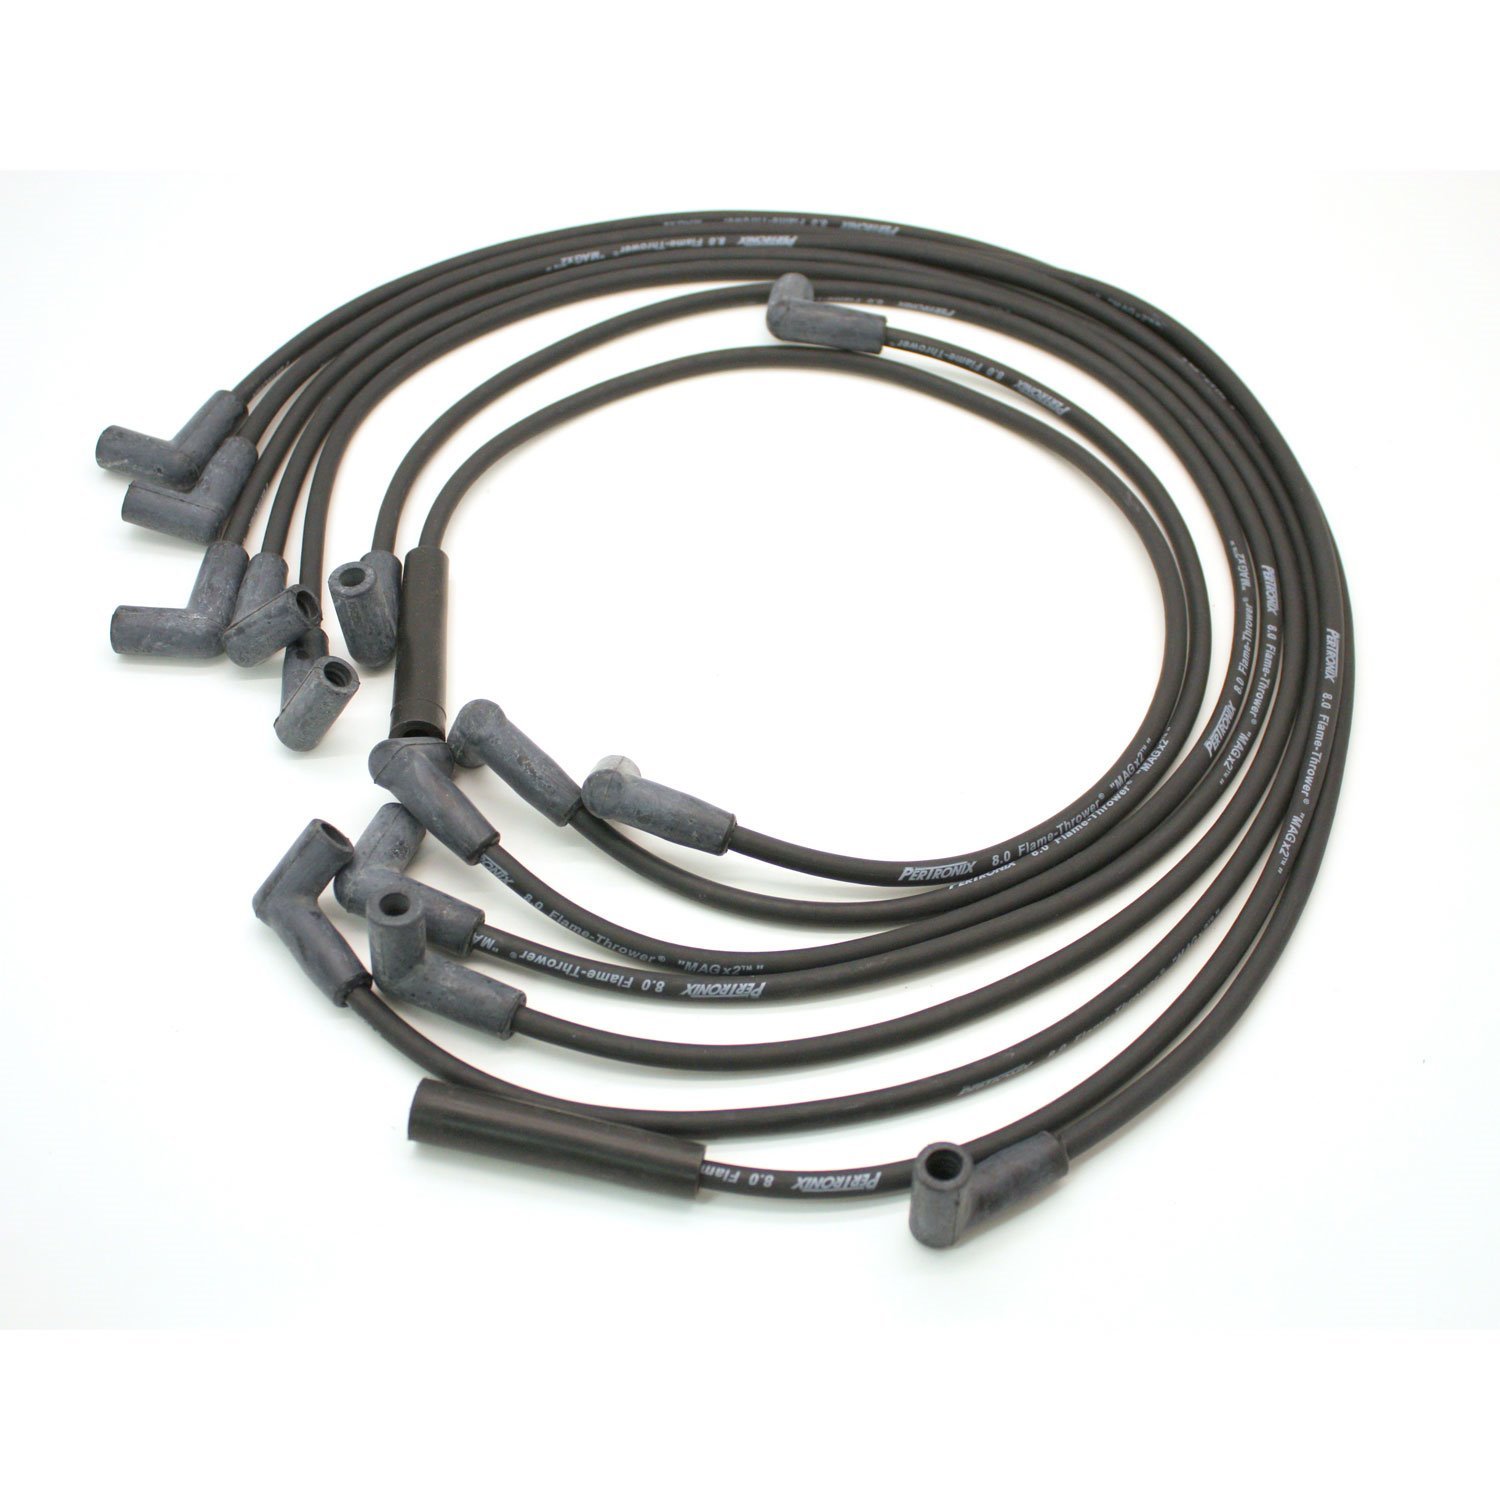 Flame-Thrower 8mm MAGx2 Spark Plug Wires 1978-86 Chevy